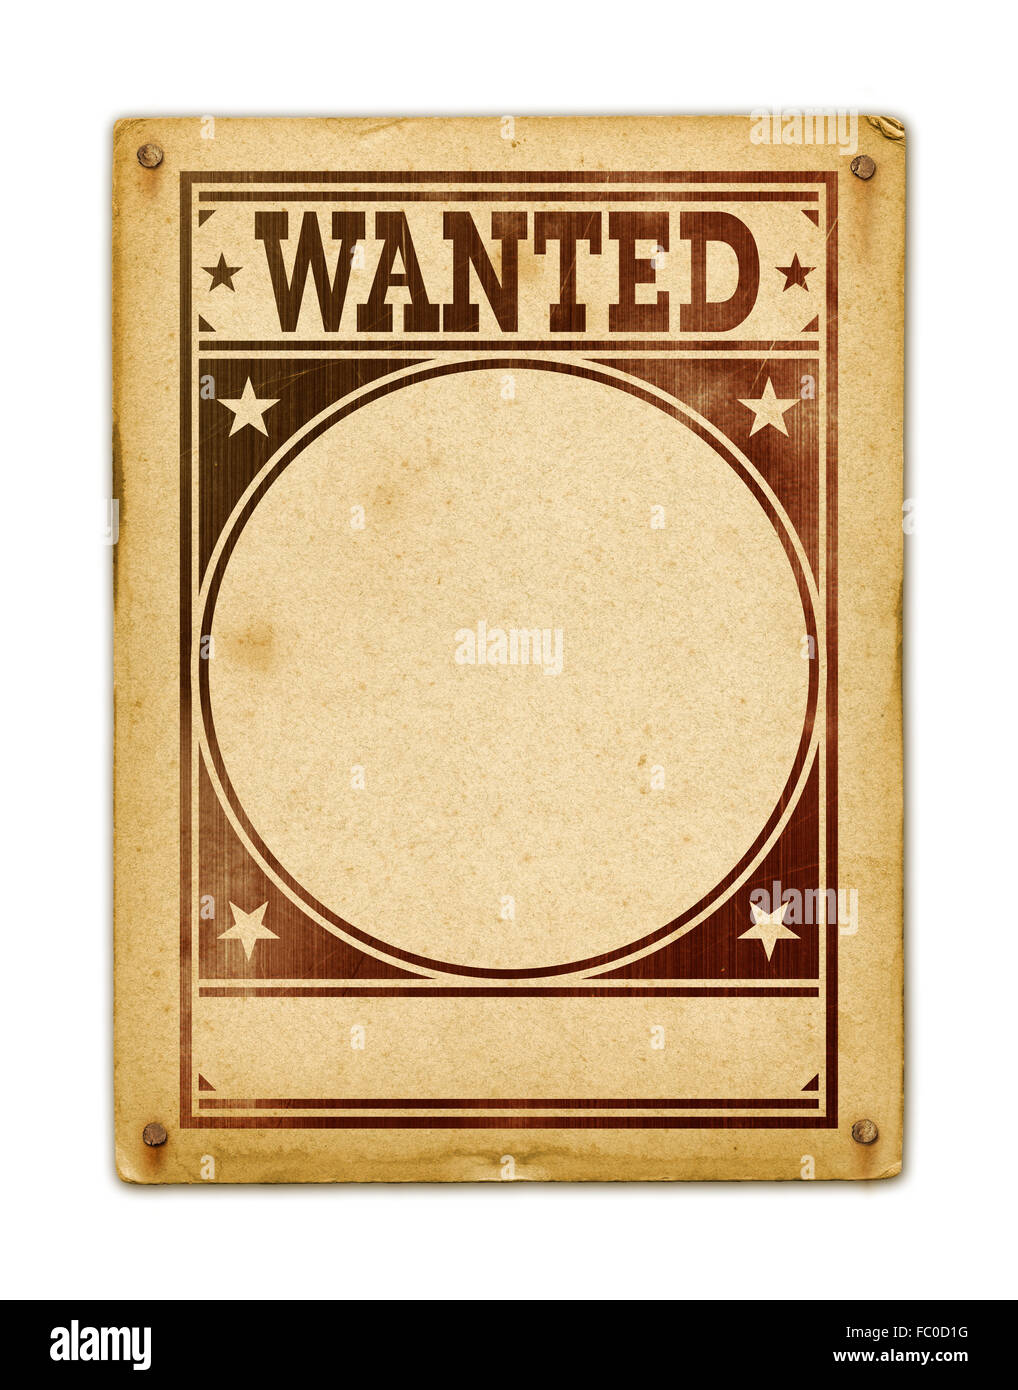 Wanted poster isolated on white Stock Photo